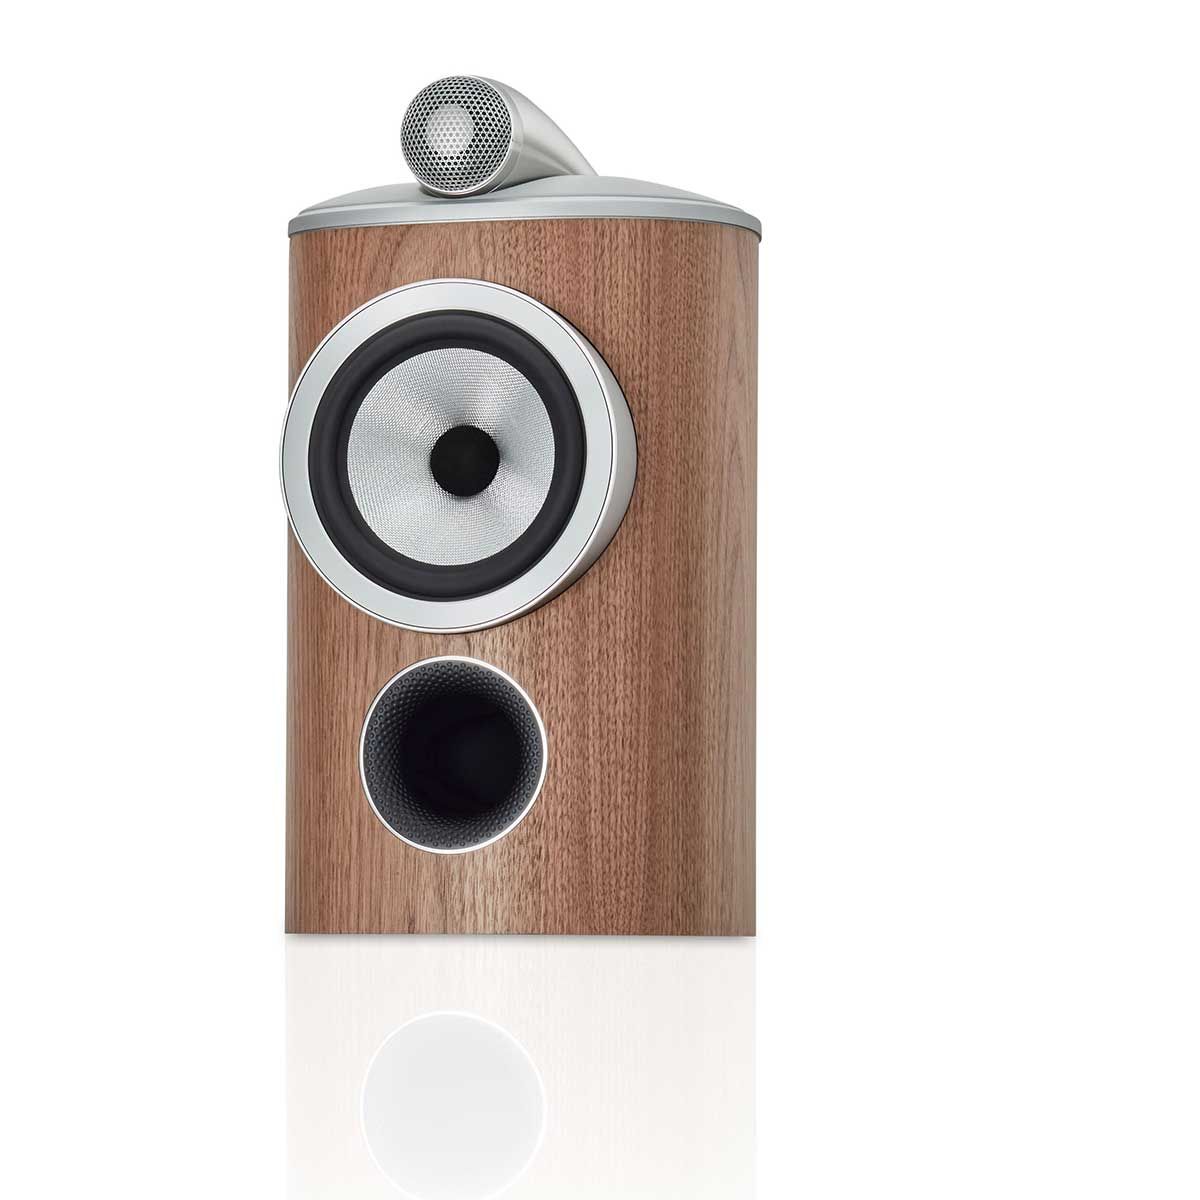 Bowers & Wilkins 805 D4 Bookshelf Speaker, Satin Walnut, front angle without grille